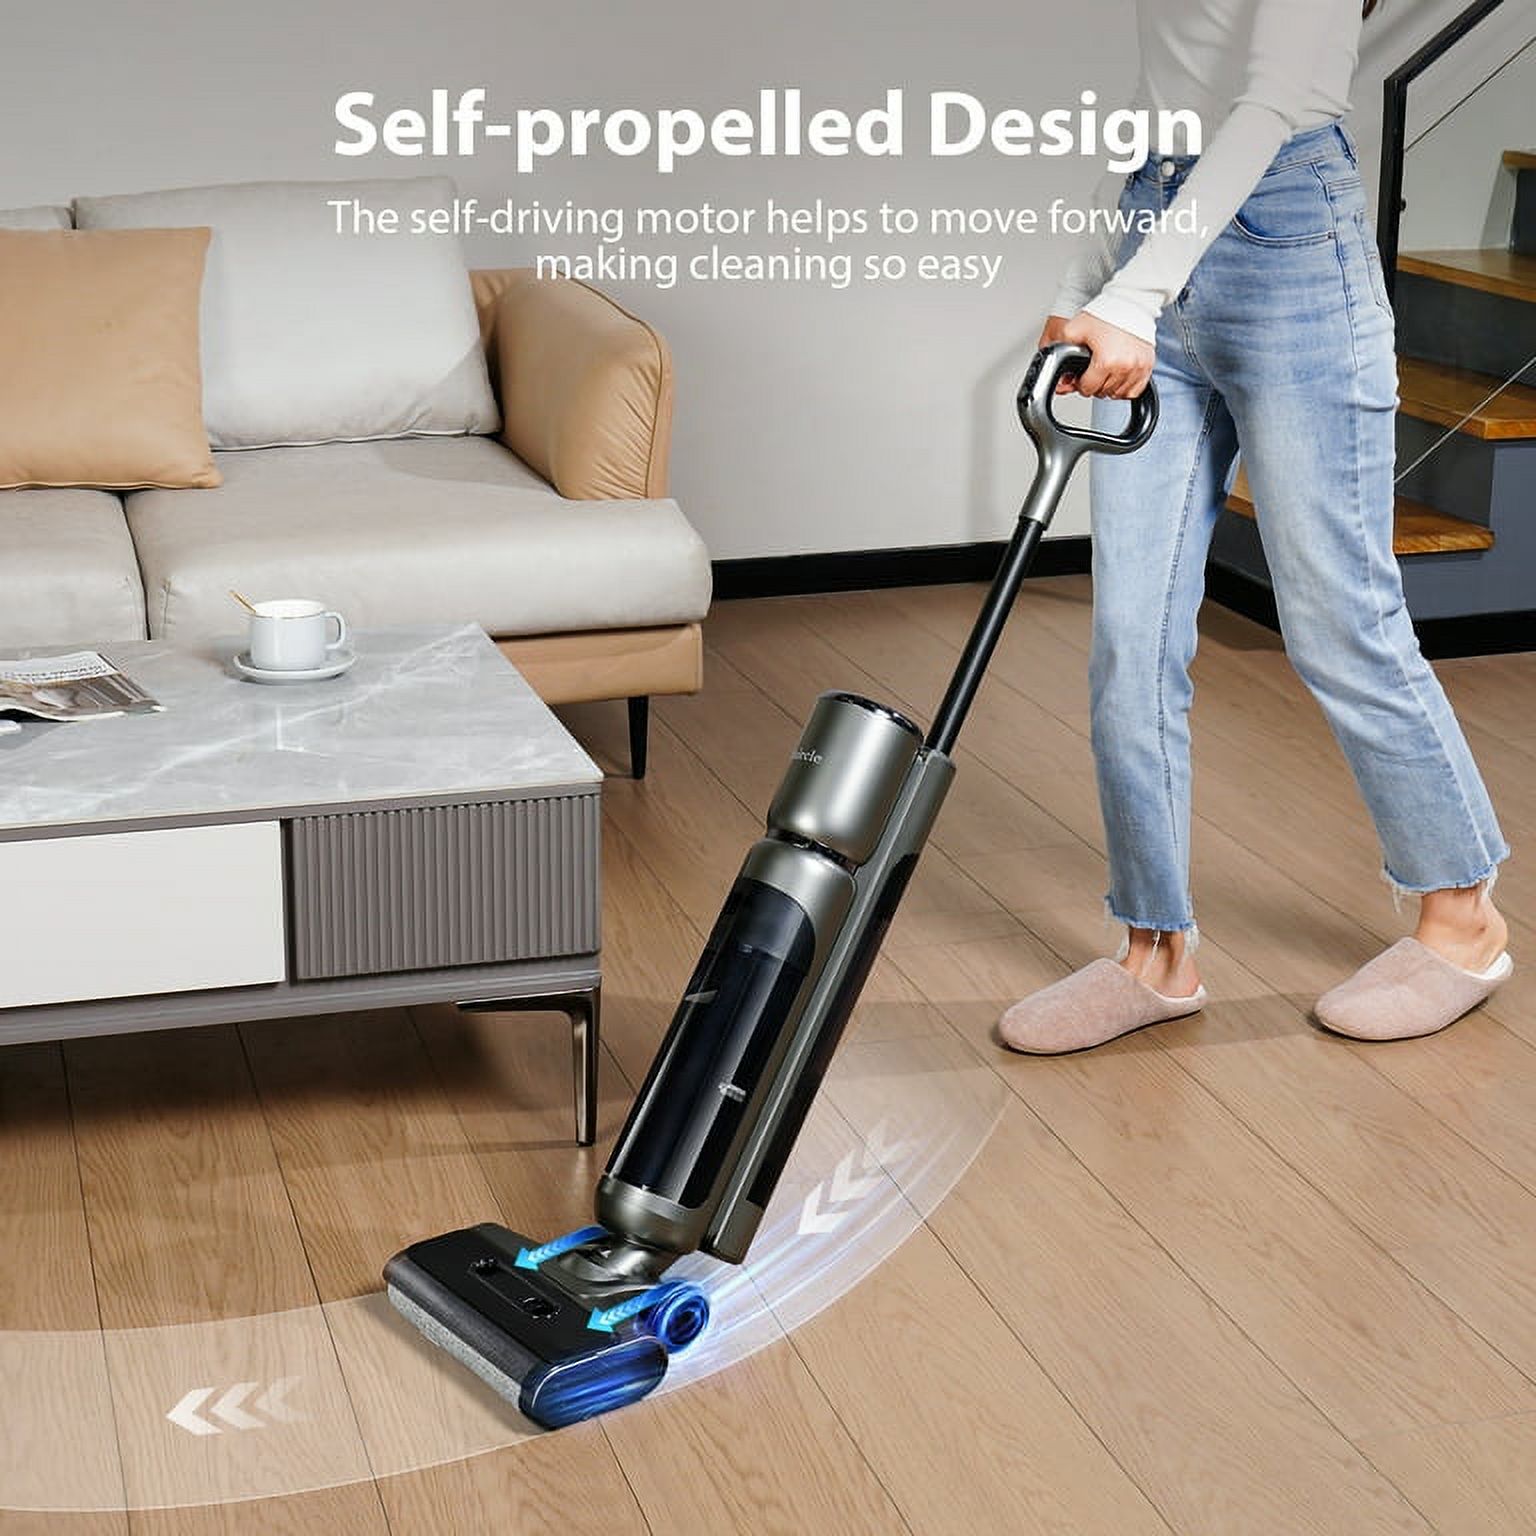 Maircle F1 Cordless Vacuum Mop Smart All-in-one, 0.75L large capacity water tank Wet Dry Vacuum Cleaner, Smart Display, Self-Propelled and Self-Cleaning, Great for Hardwood Floor - image 3 of 10